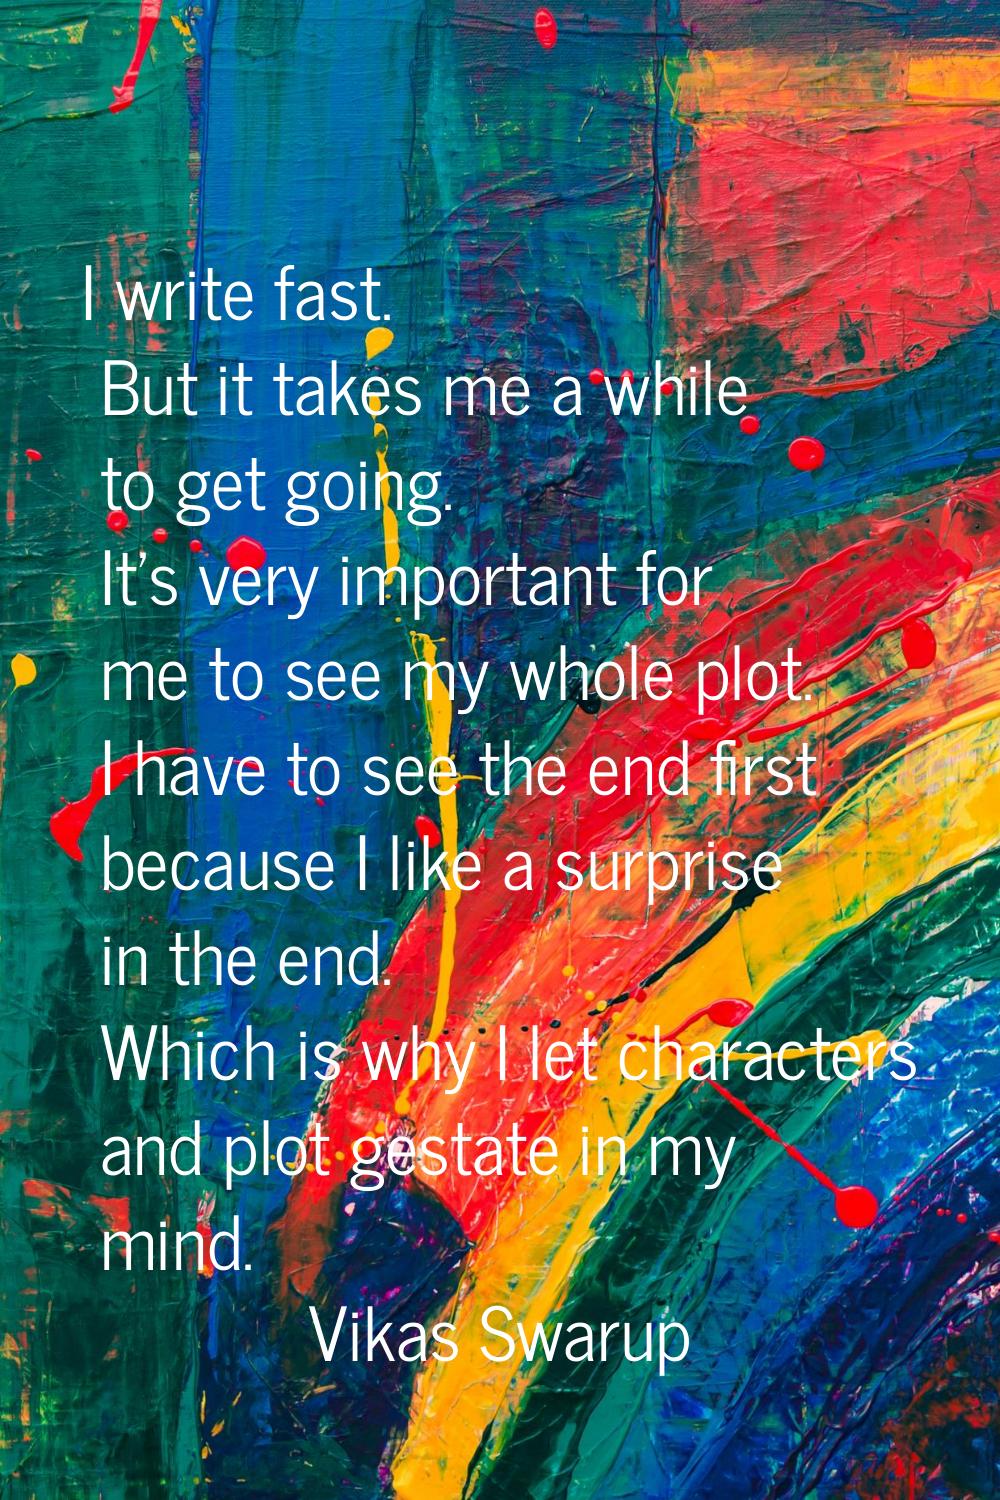 I write fast. But it takes me a while to get going. It's very important for me to see my whole plot